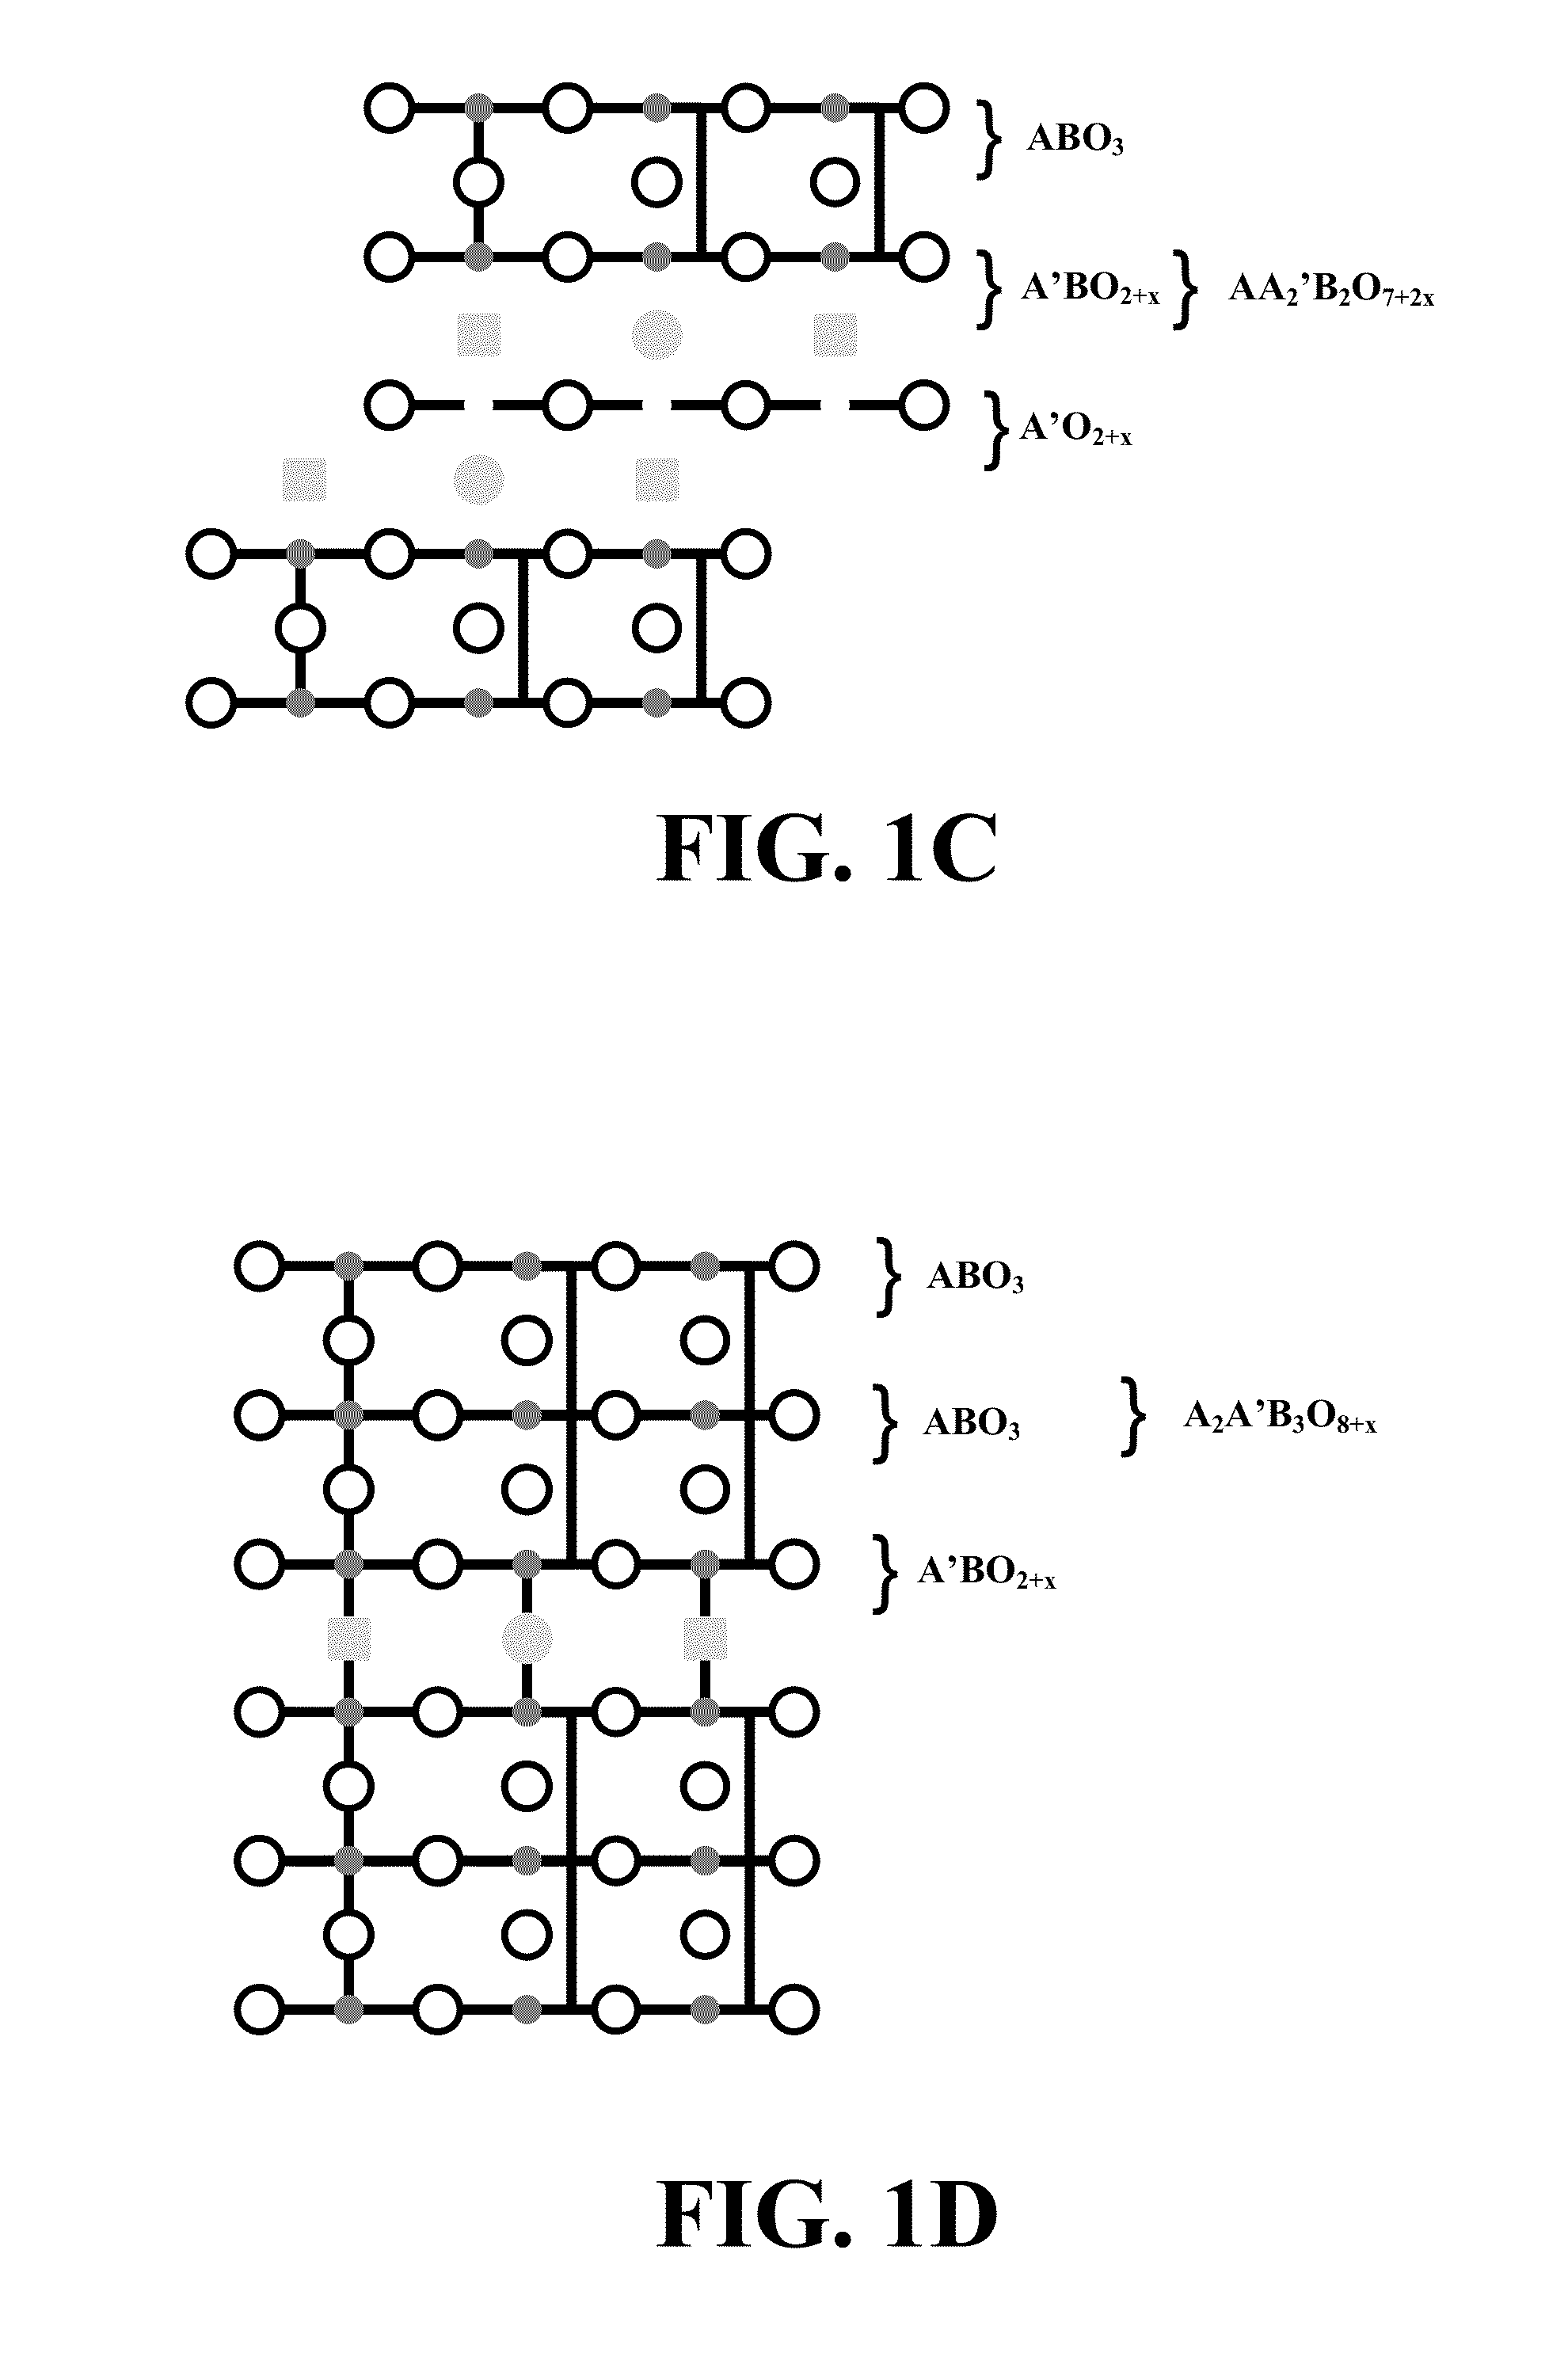 Methods for using novel cathode and electrolyte materials for solid oxide fuel cells and ion transport membranes